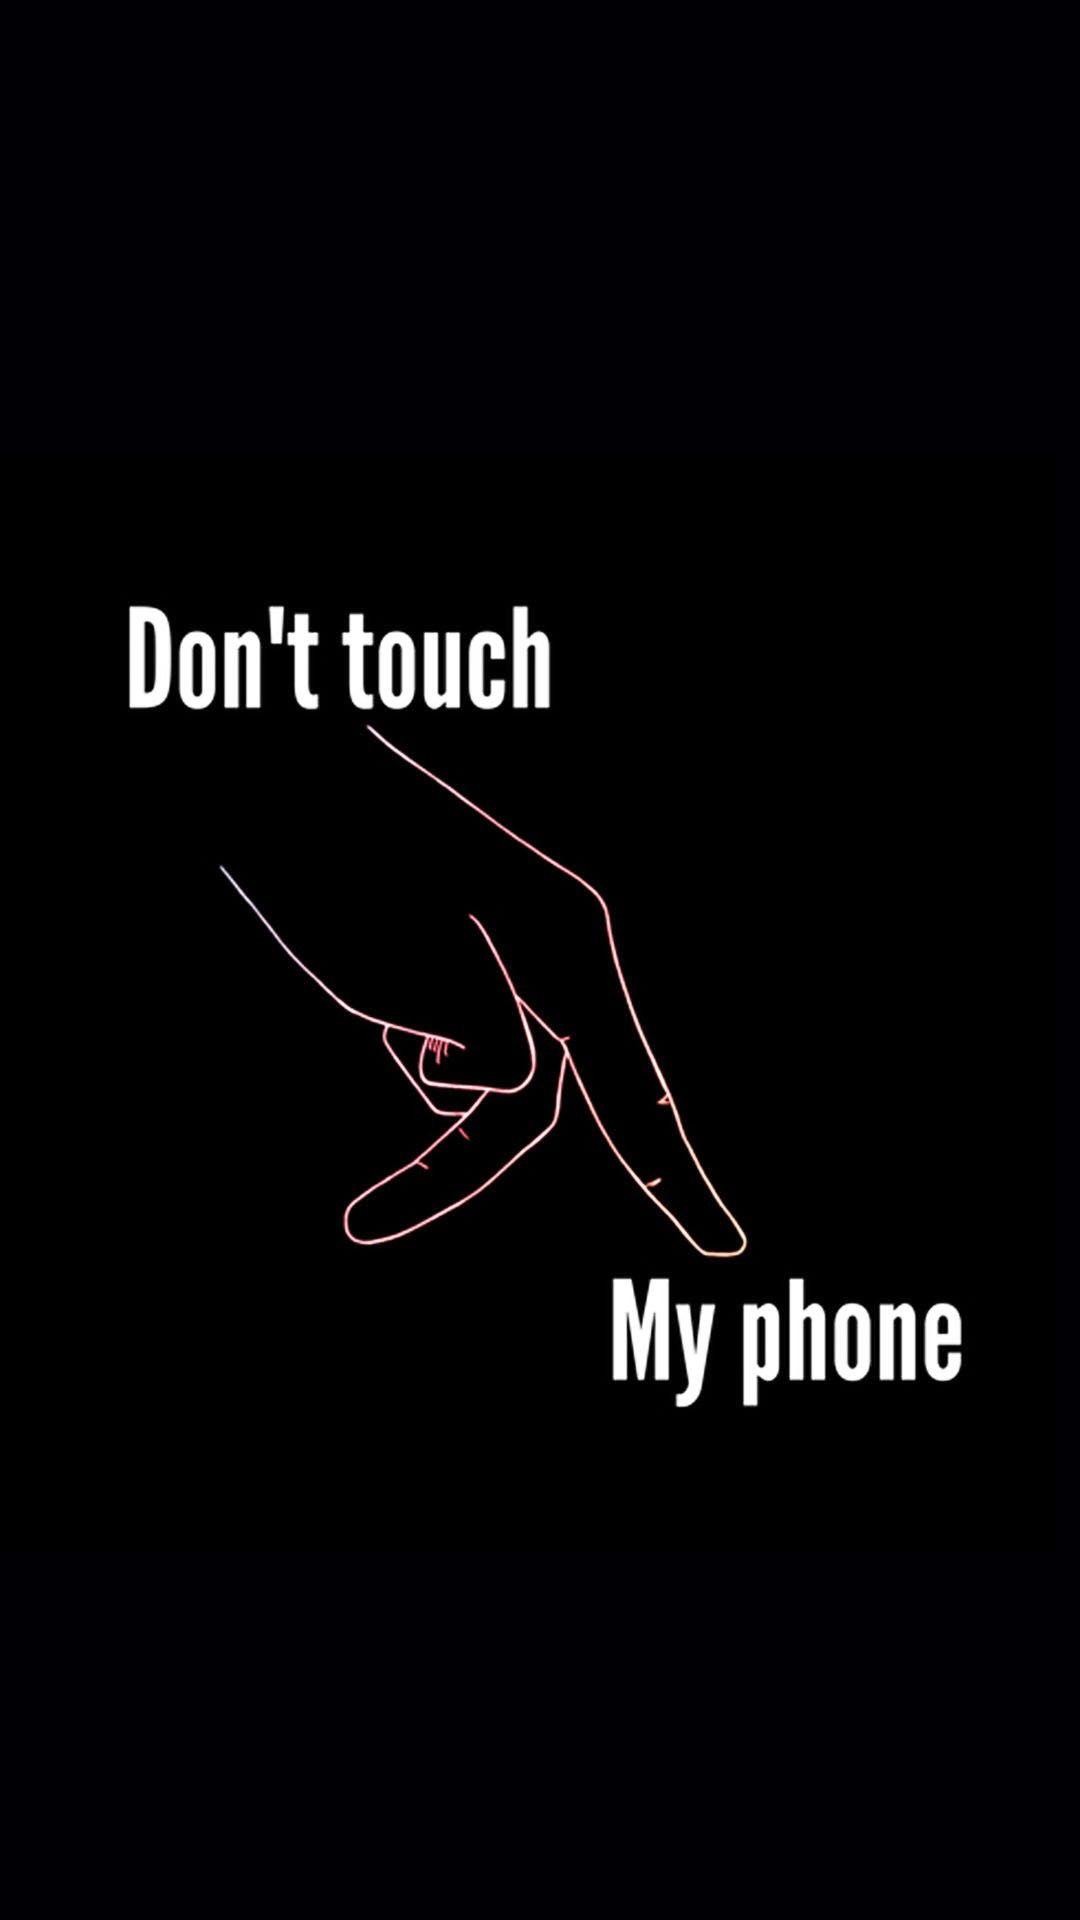 1080x1920 102 best don't touch my phone images on Pinterest